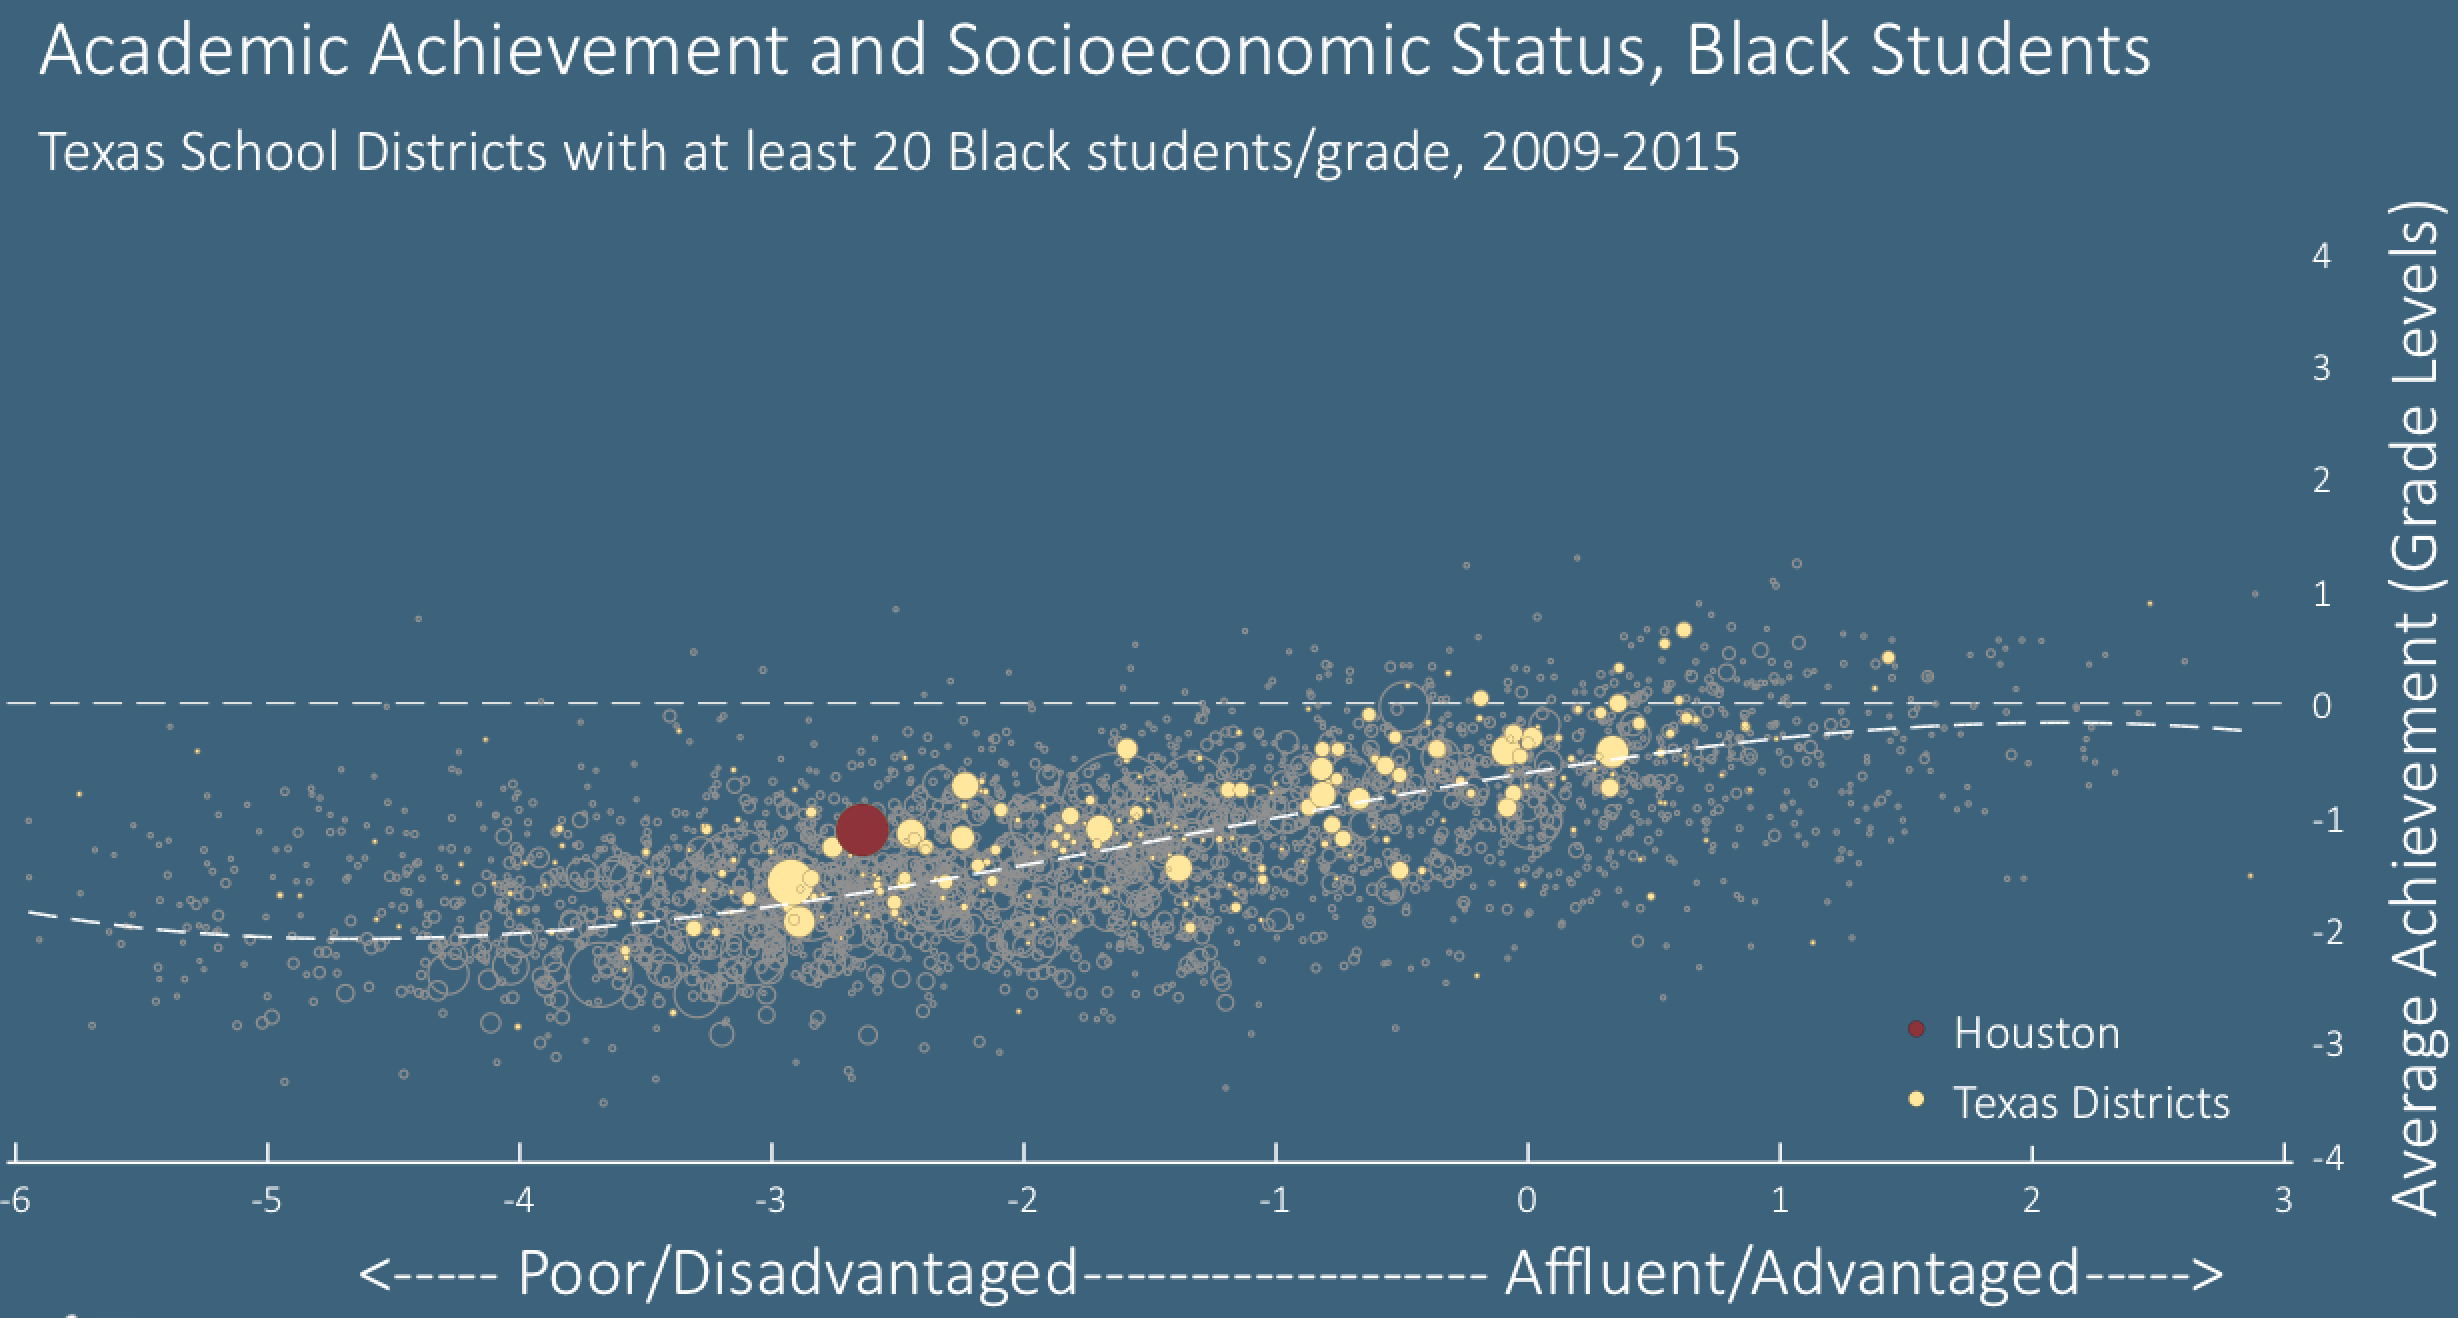 Black student performance on standardized tests in each district plotted against socioeconomic status. Houston Independent School District shown in red. Source: Sean Reardon.